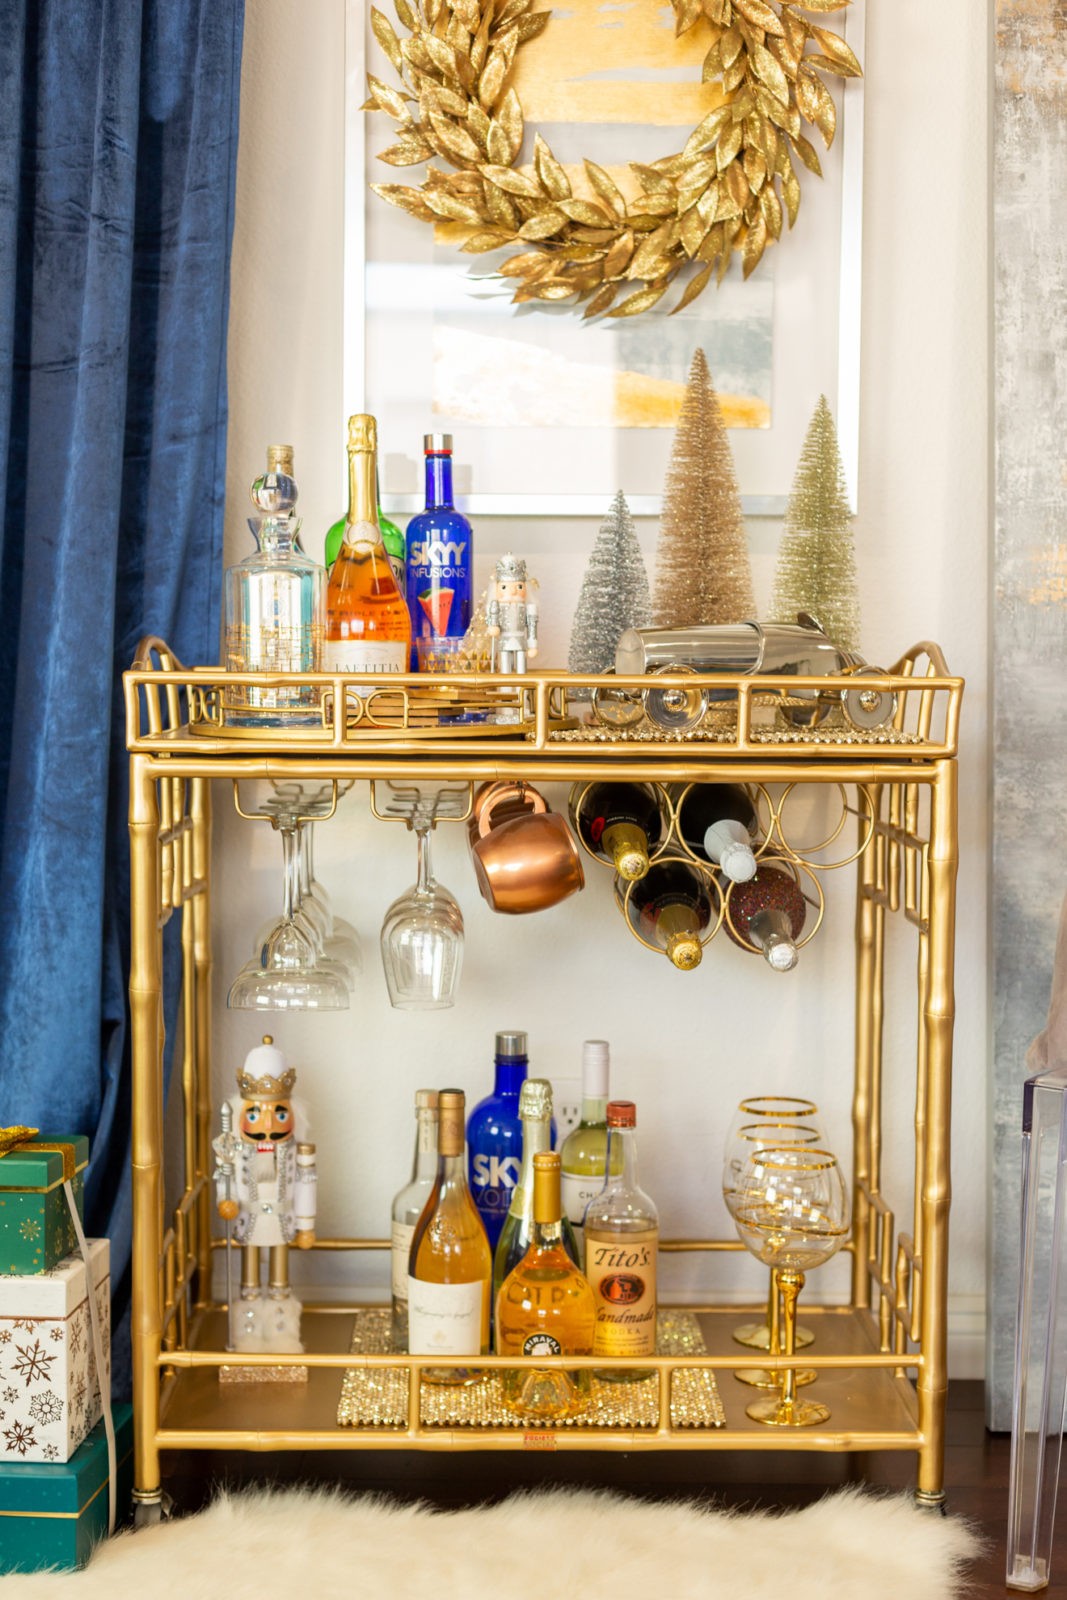 How to Decorate a Holiday Bar Cart in 5 Simple Steps by Home Decor Blogger Laura Lily, | Holiday Home Decor 2019 by popular Los Angeles life and style blogger, Laura Lily: image of gold bar cart with bottle brush metallic trees, glasses, a nutcracker, and alcoholic beverages. 